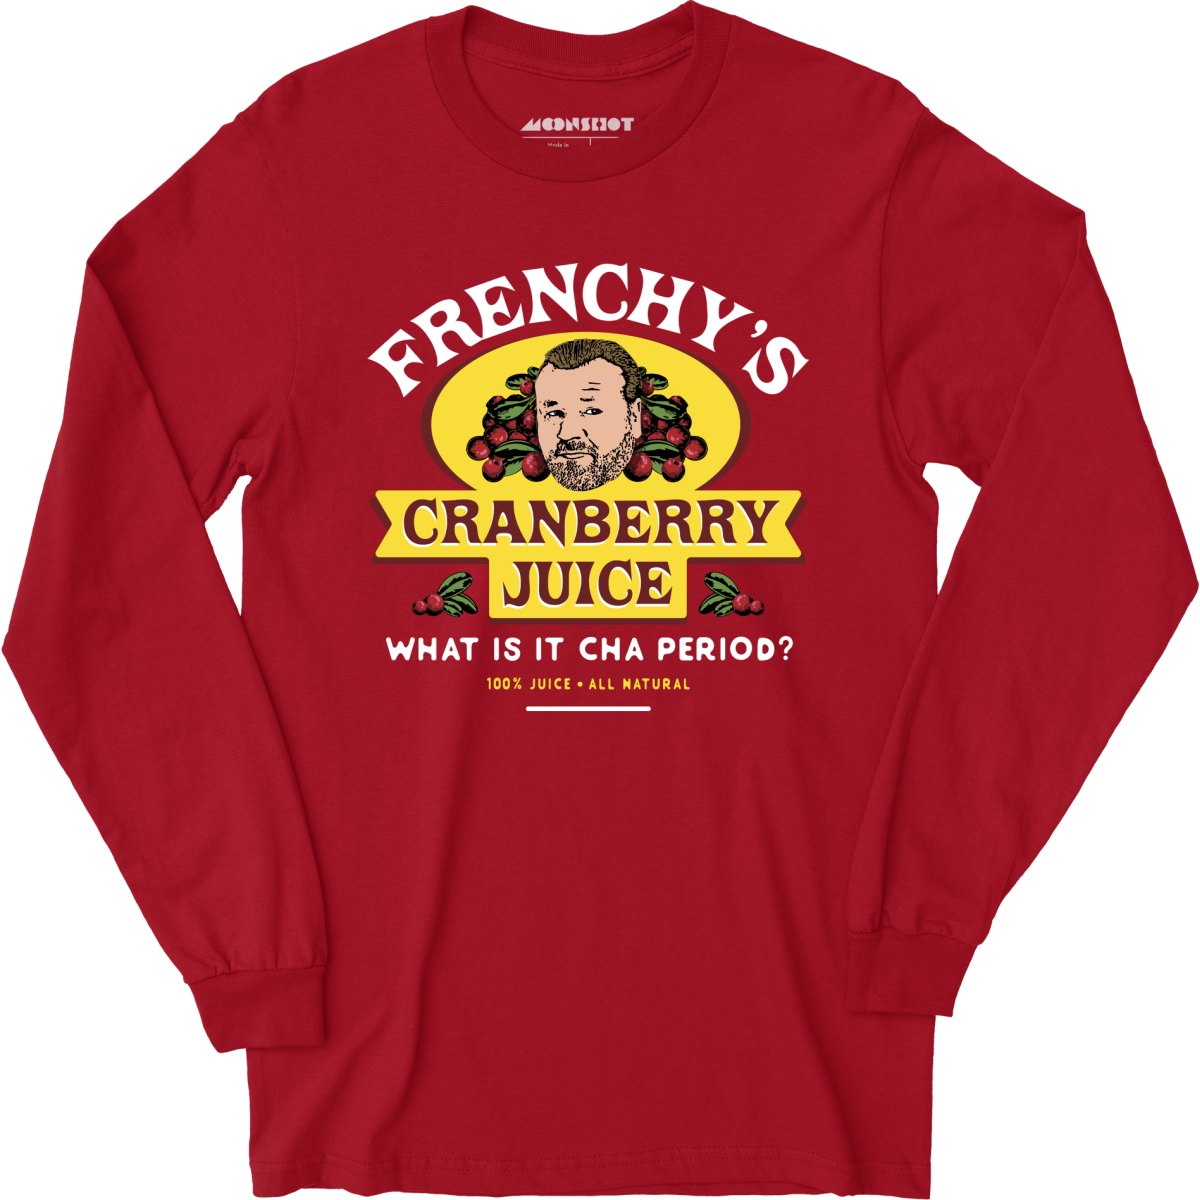 Frenchy's Cranberry Juice - The Departed - Long Sleeve T-Shirt